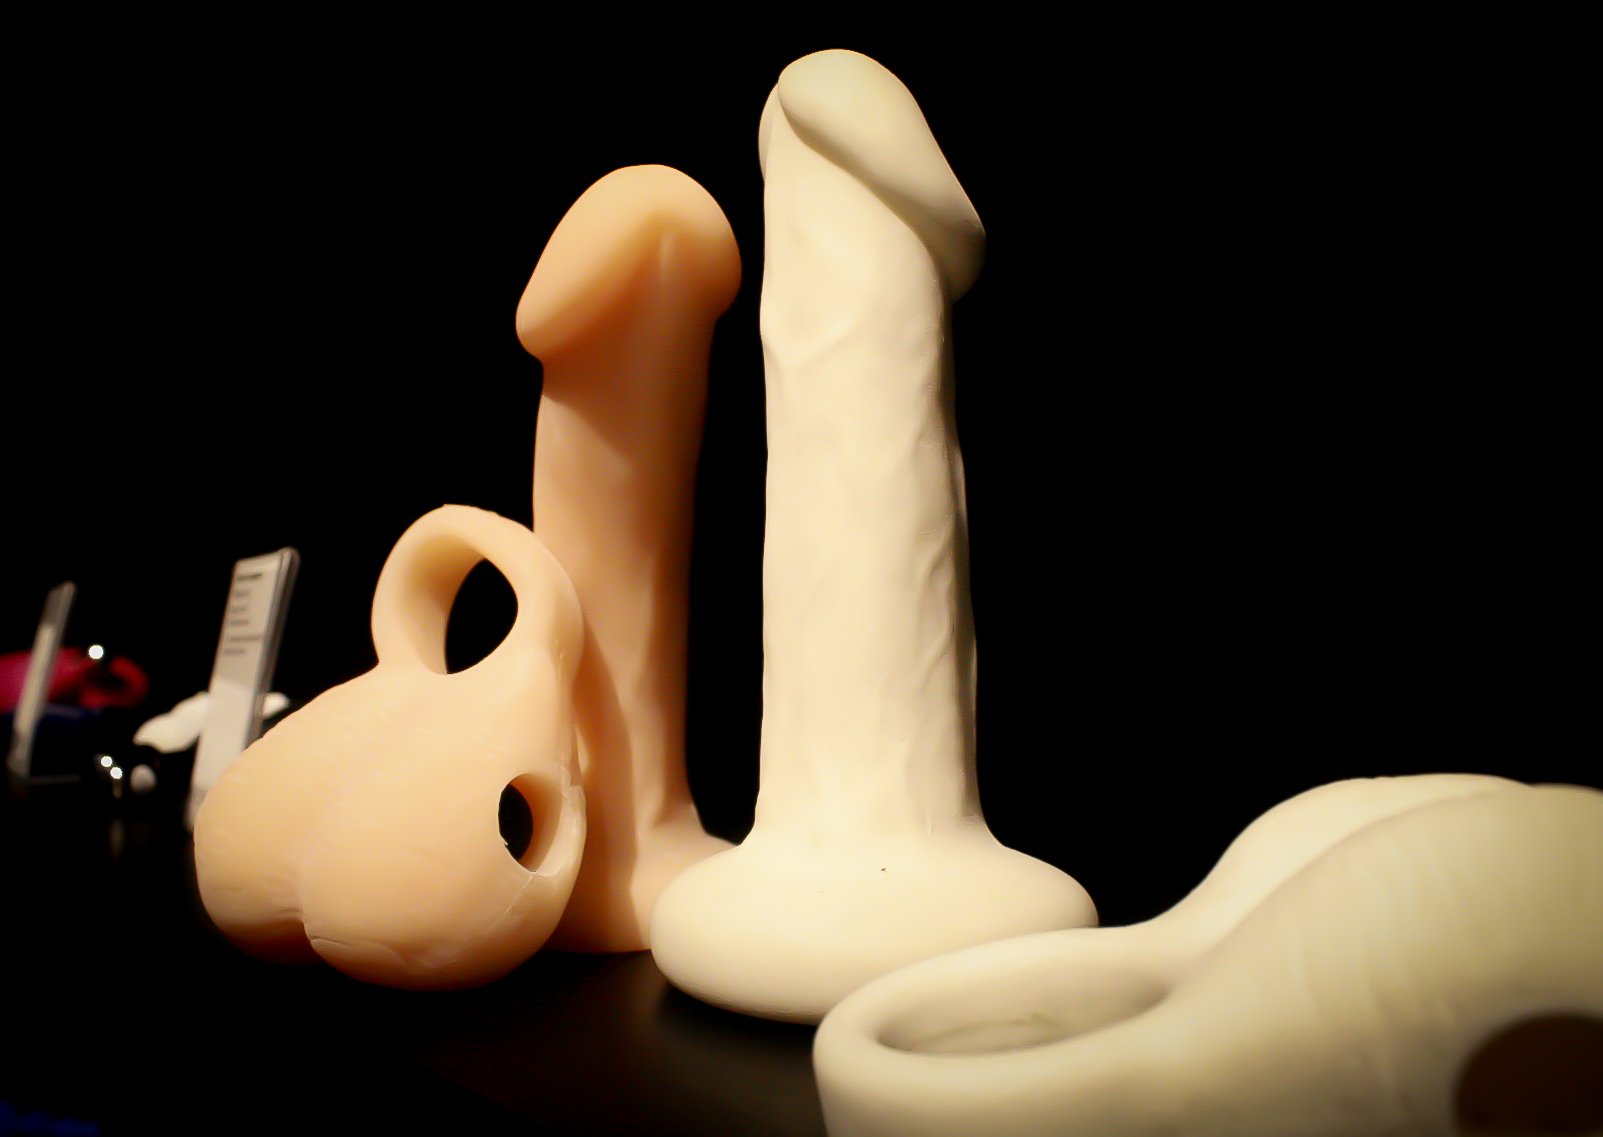 New York Toy Collective's silicon toys are prototyped using a 3D printer